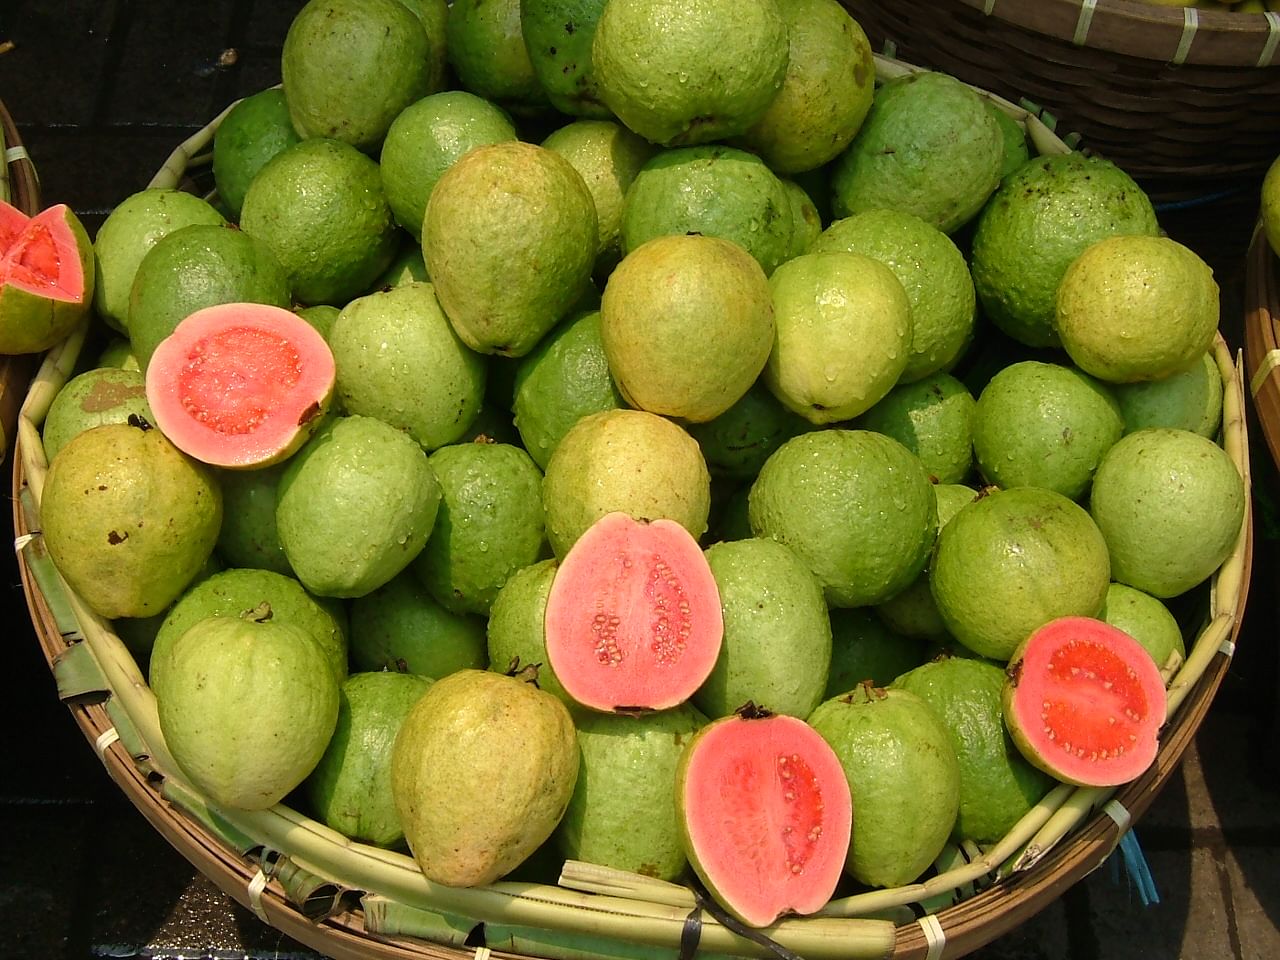 How to make the most of guava season | The Daily Star